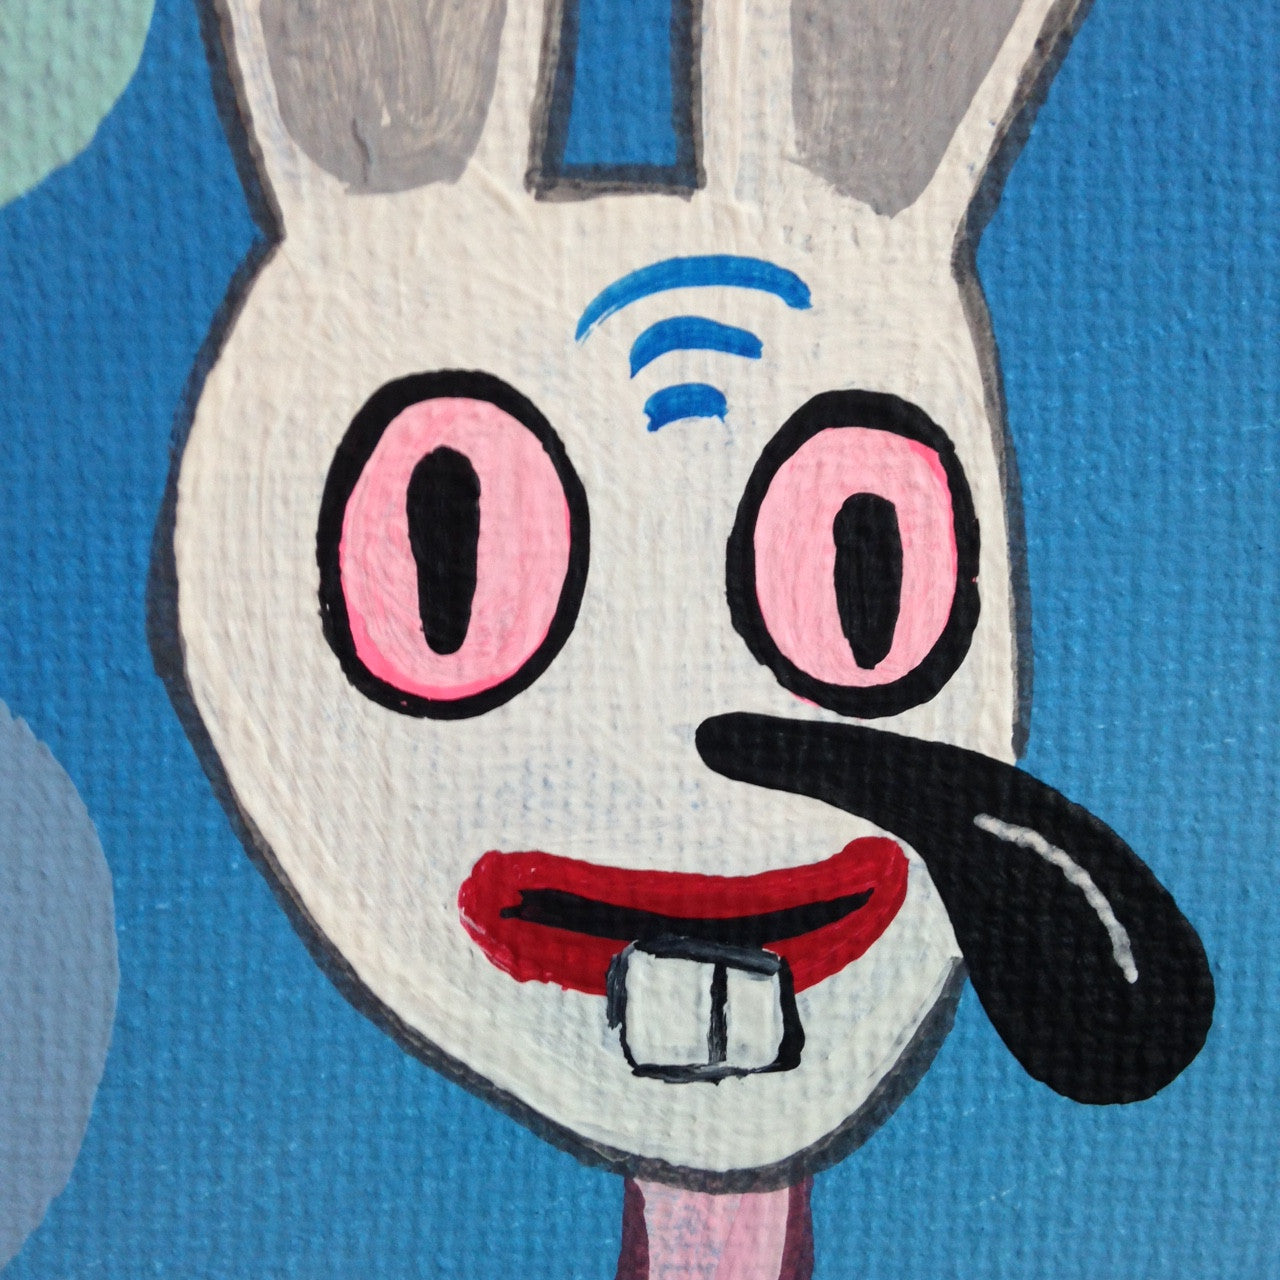 Day 300- Let Me Show You My Dreams- Tribute to Gary Baseman